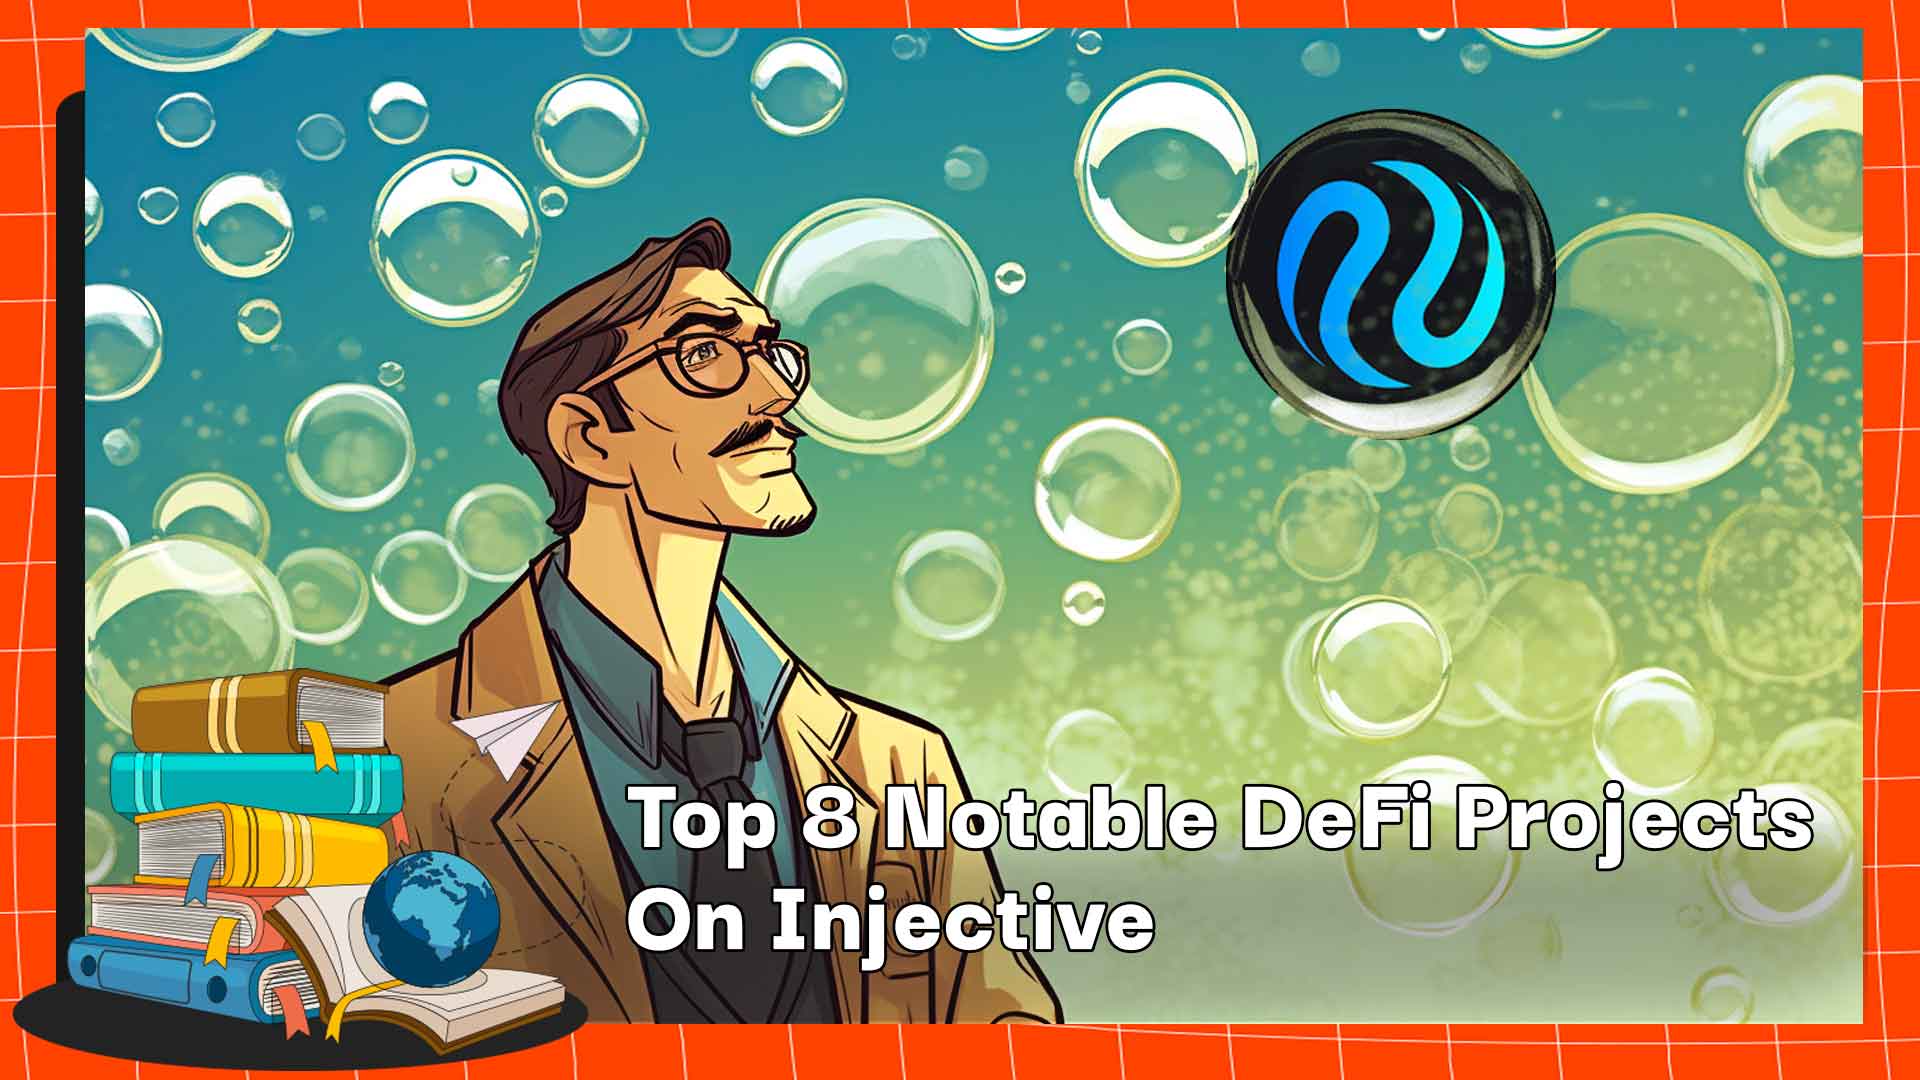 Top 8 Notable DeFi Projects On Injective